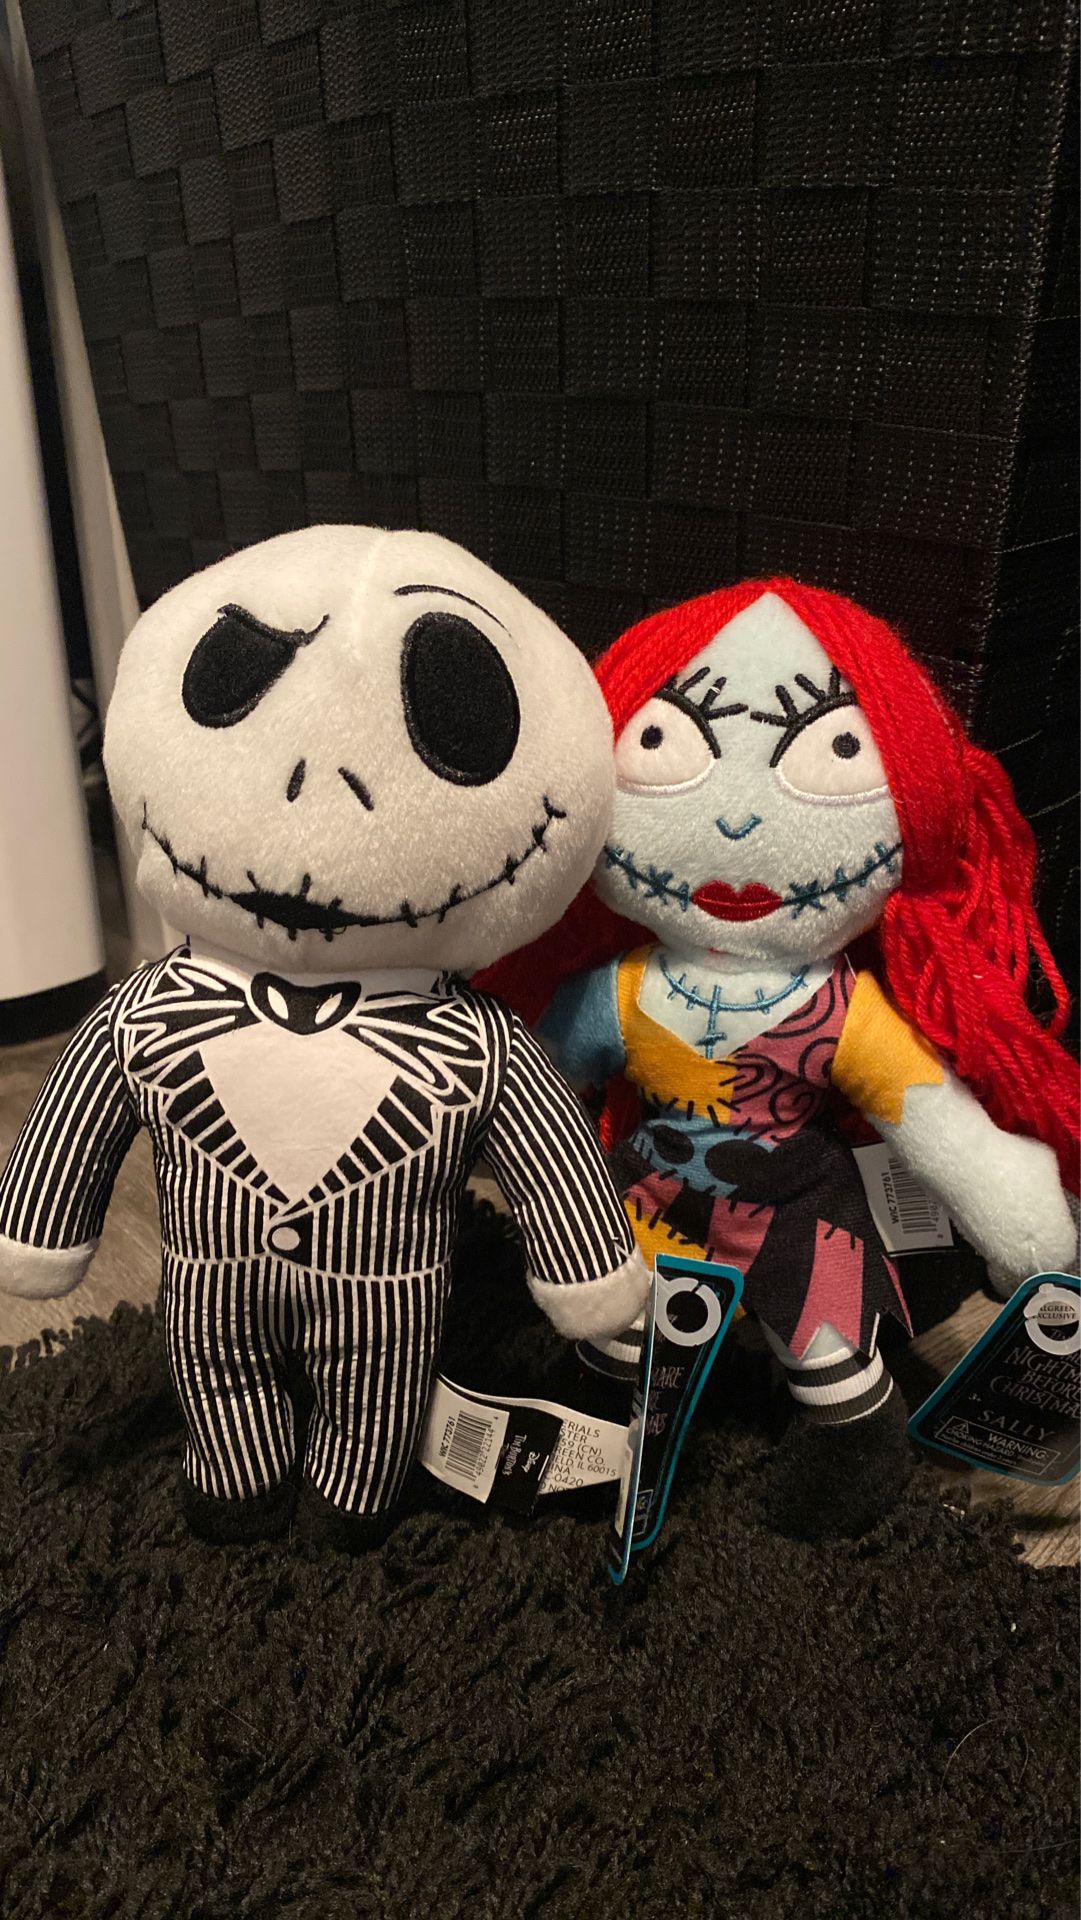 Jack and sally plushies